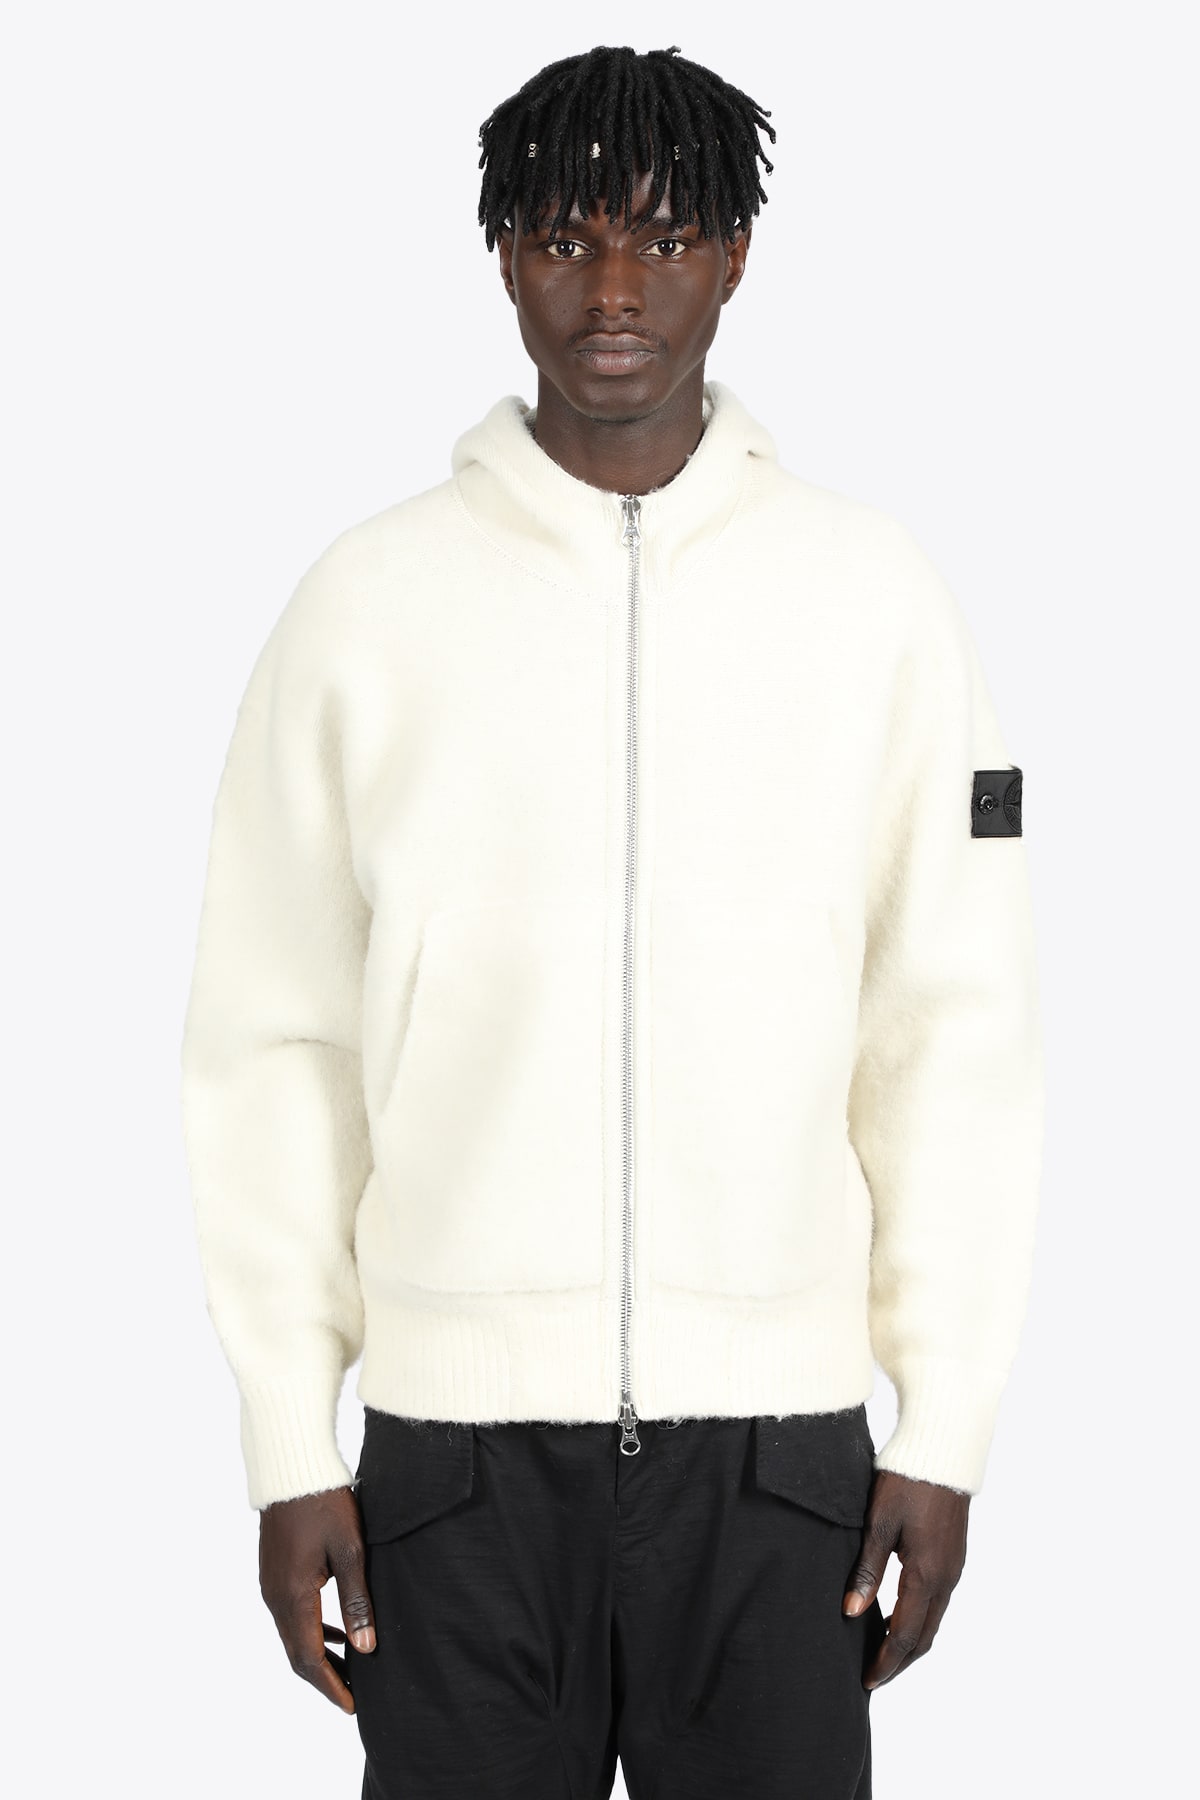 Stone Island Shadow Project Zip Hoodie Ivory white wool blend hooded sweater with zip